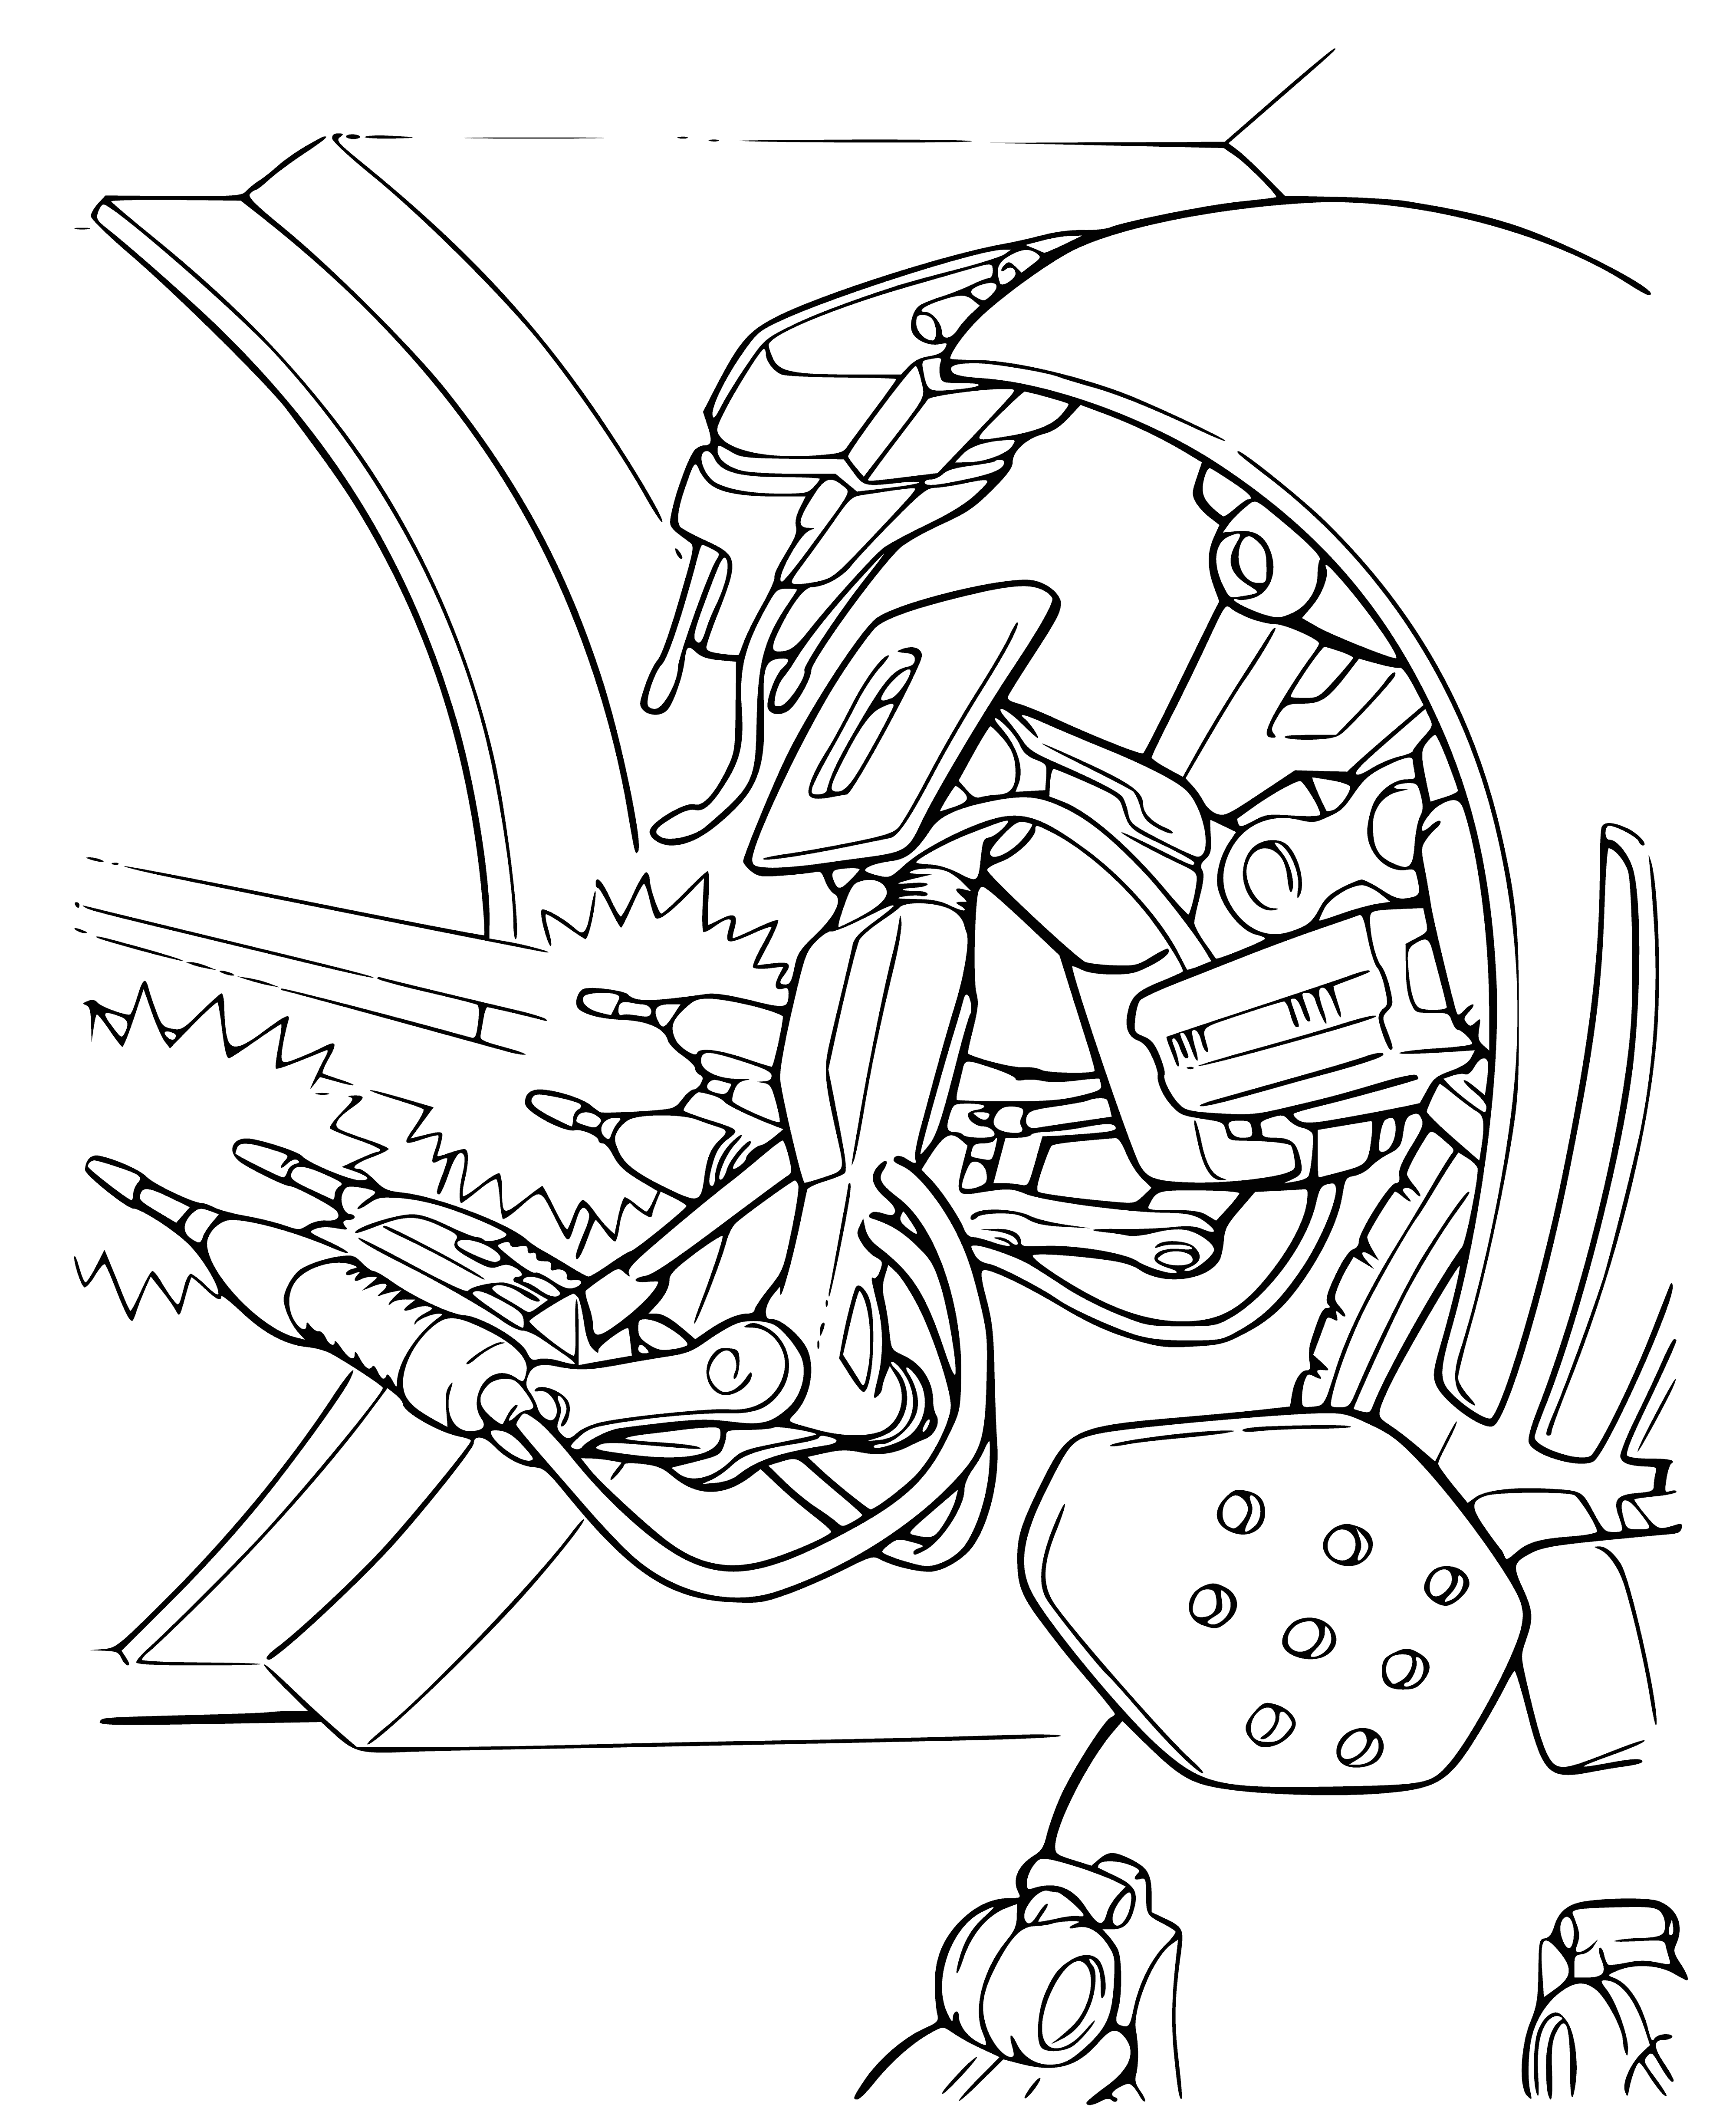 coloring page: Naboo starfighter battles android destroyer trying to break Naboo shield in Star Wars: Episode I - The Phantom Menace.